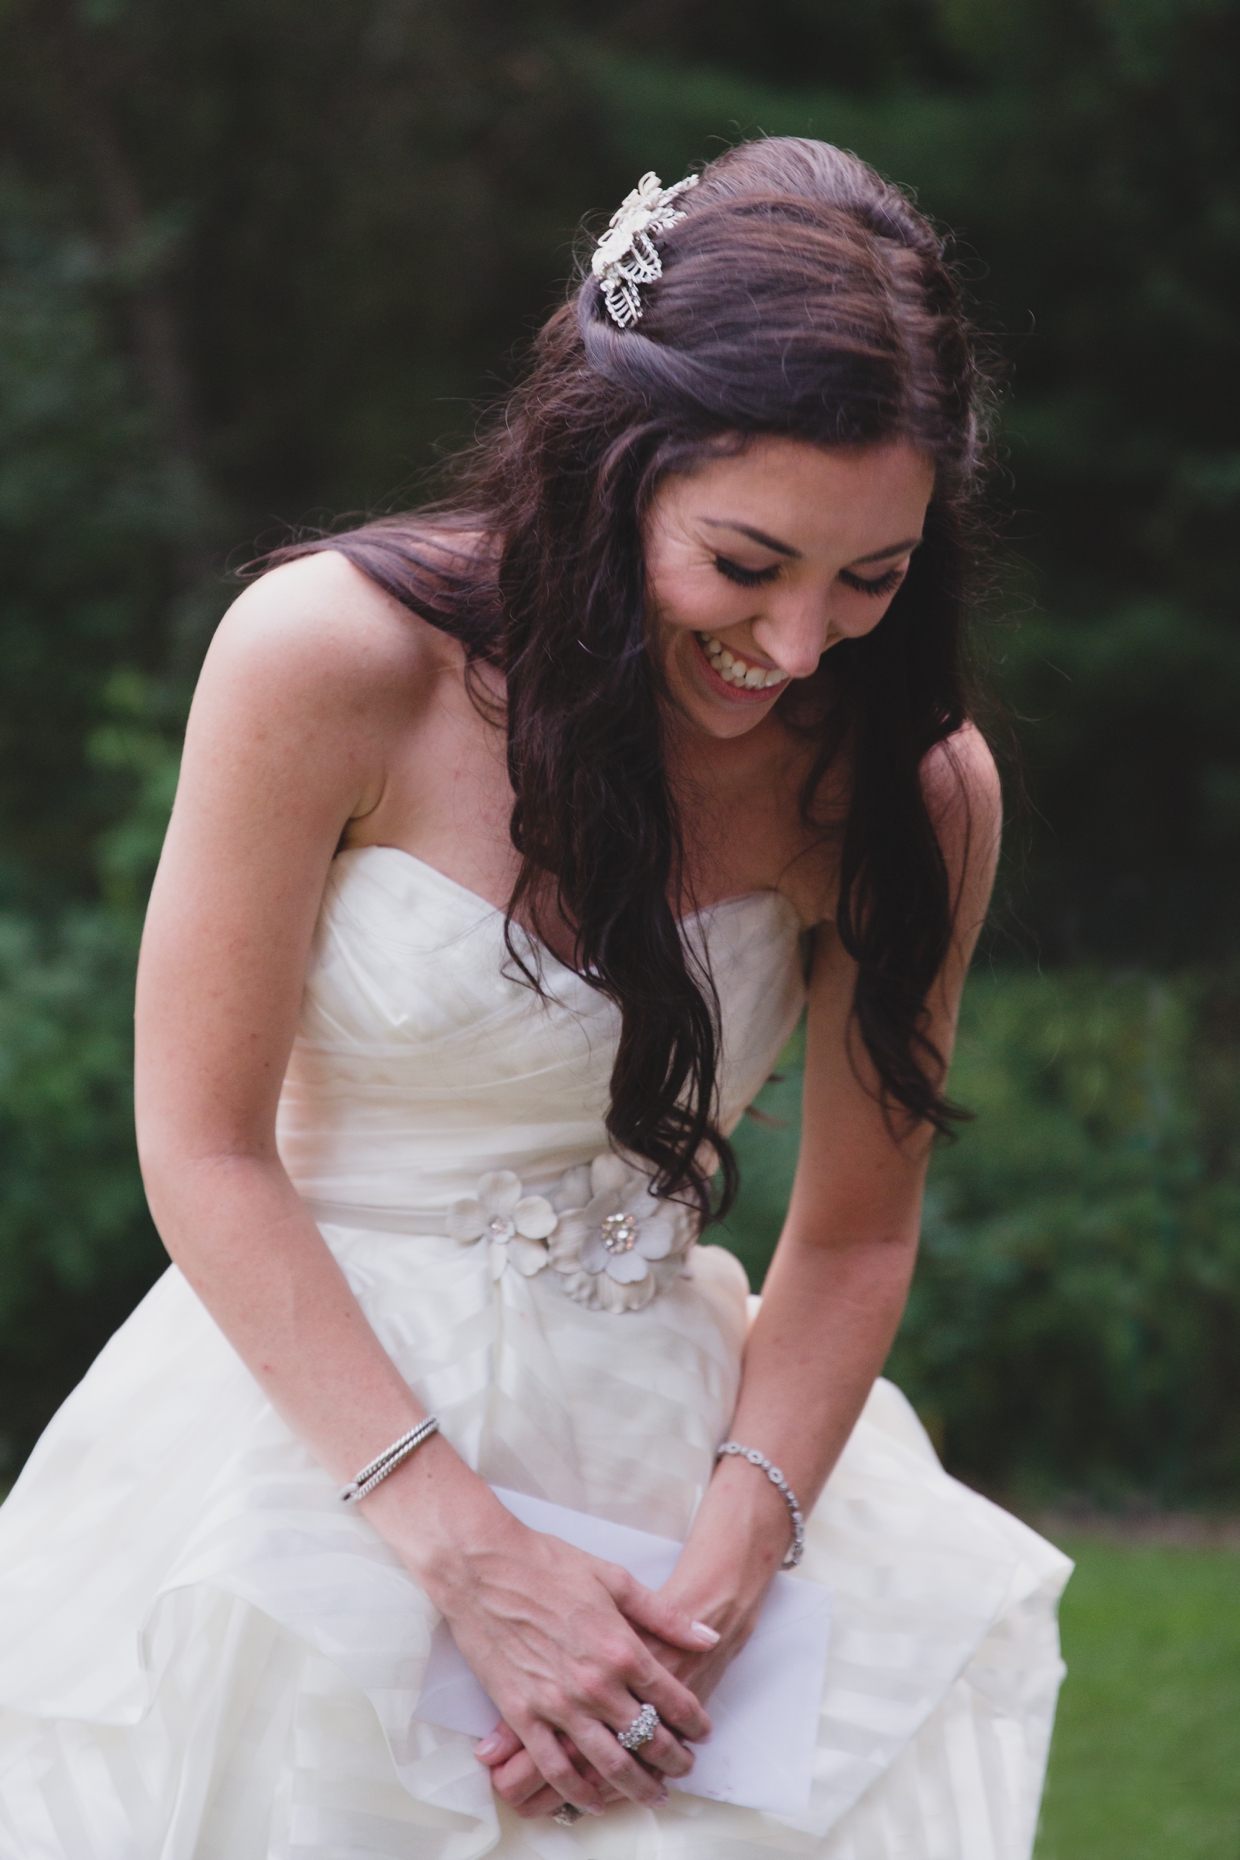 A candid photograph of a brdie laughing in her hayley paige guindon wedding dress during her backyard wedding in Massachusetts